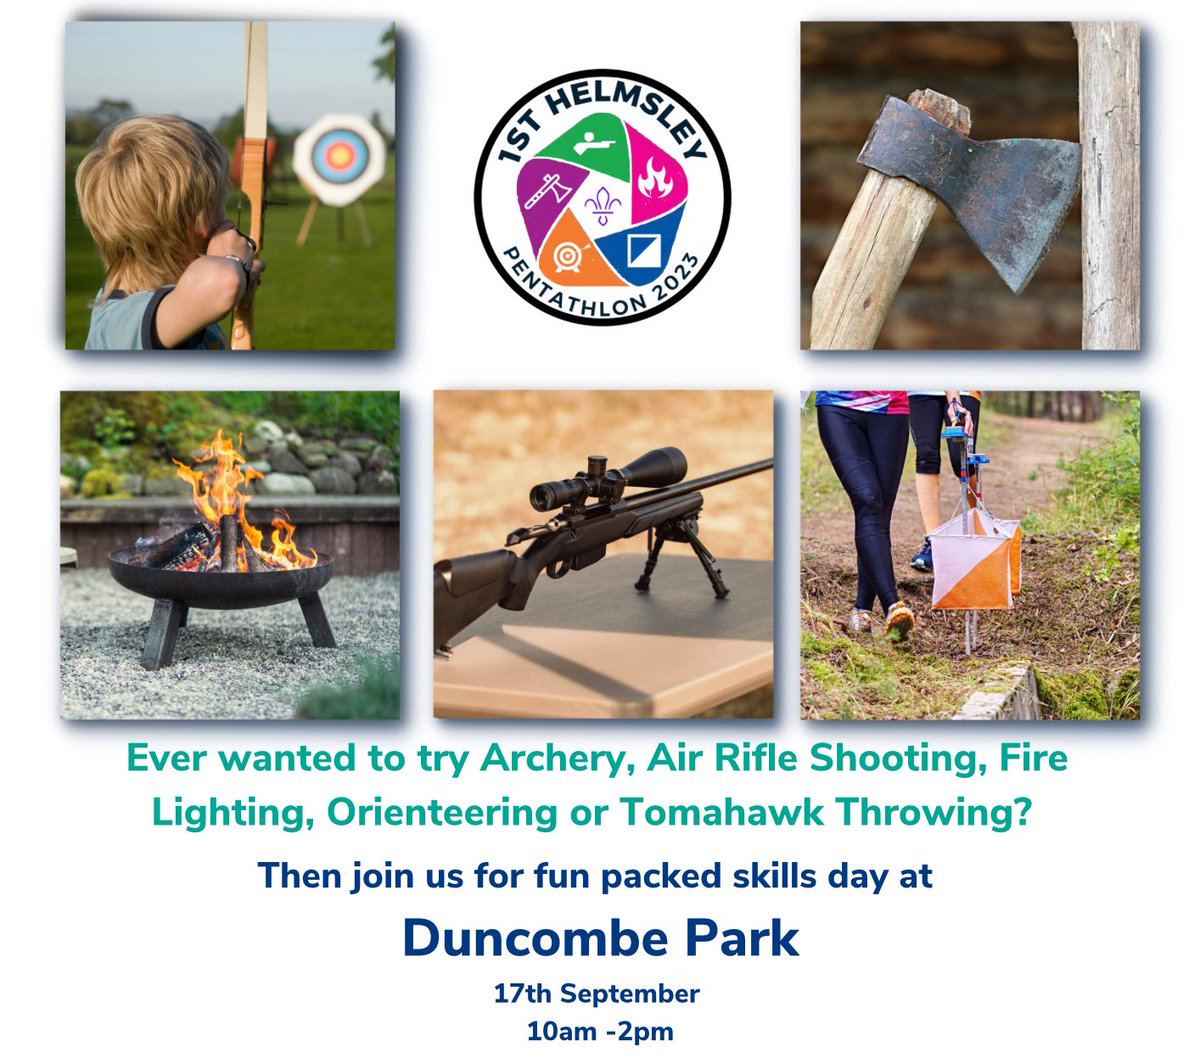 This year we are hosting our 1st ever Pentathlon -Sun 17th Sep at @DuncombePark - open to ALL
We are looking for few volunteers to help for a few of hours on a  fun, family day!  Please share and get in touch via enquiries@1sthelmsleyscouts.org.uk 
@gazetteherald @VisitHelmsley